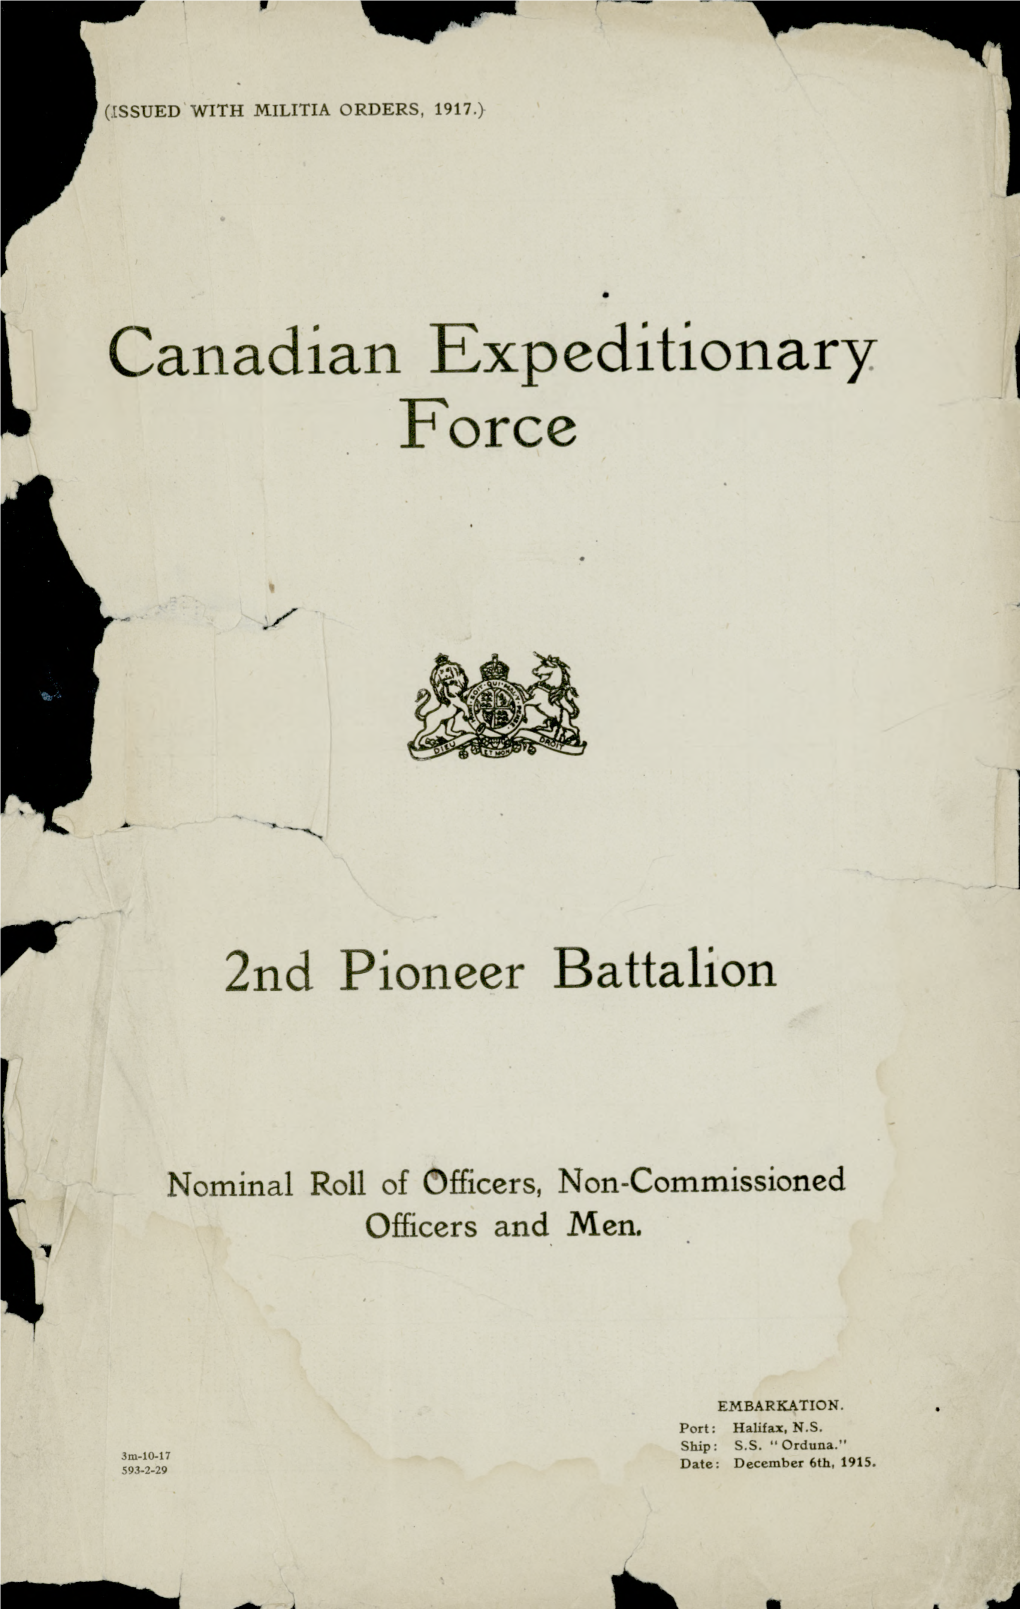 I. Canadian Expeditionary Force